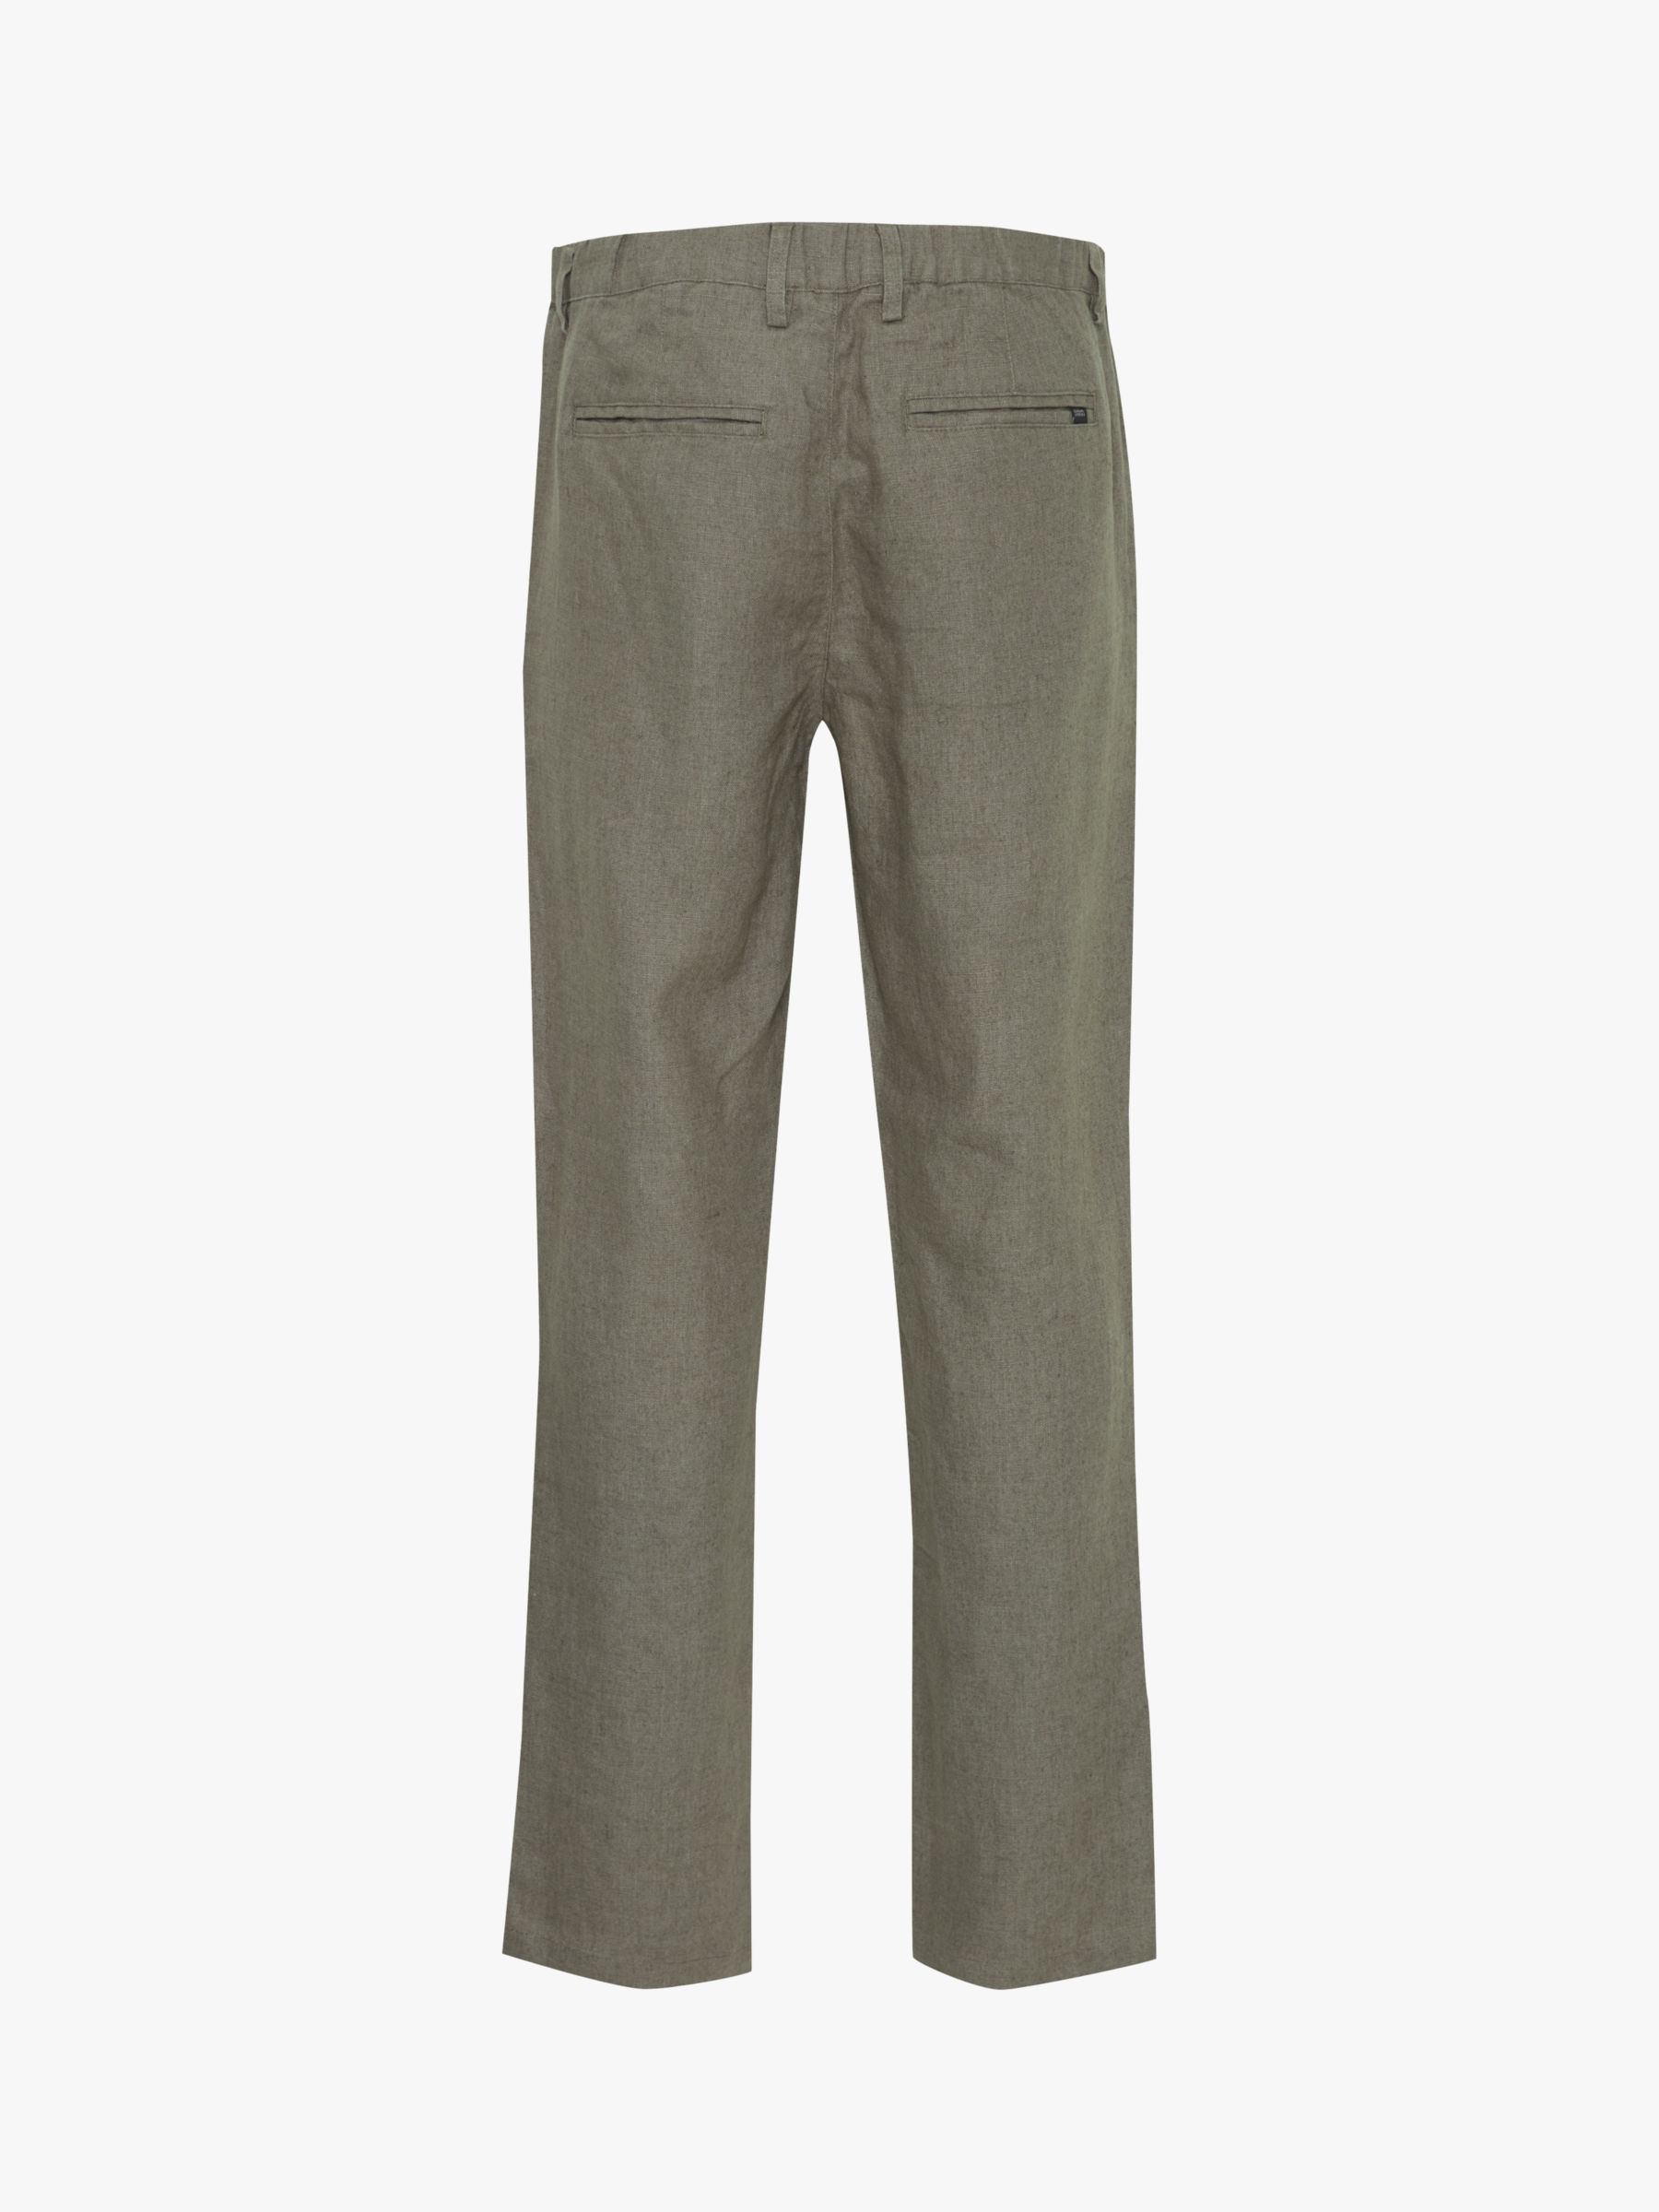 Casual Friday Pandrup Regular Fit Linen Trousers, Agave Green, 28R